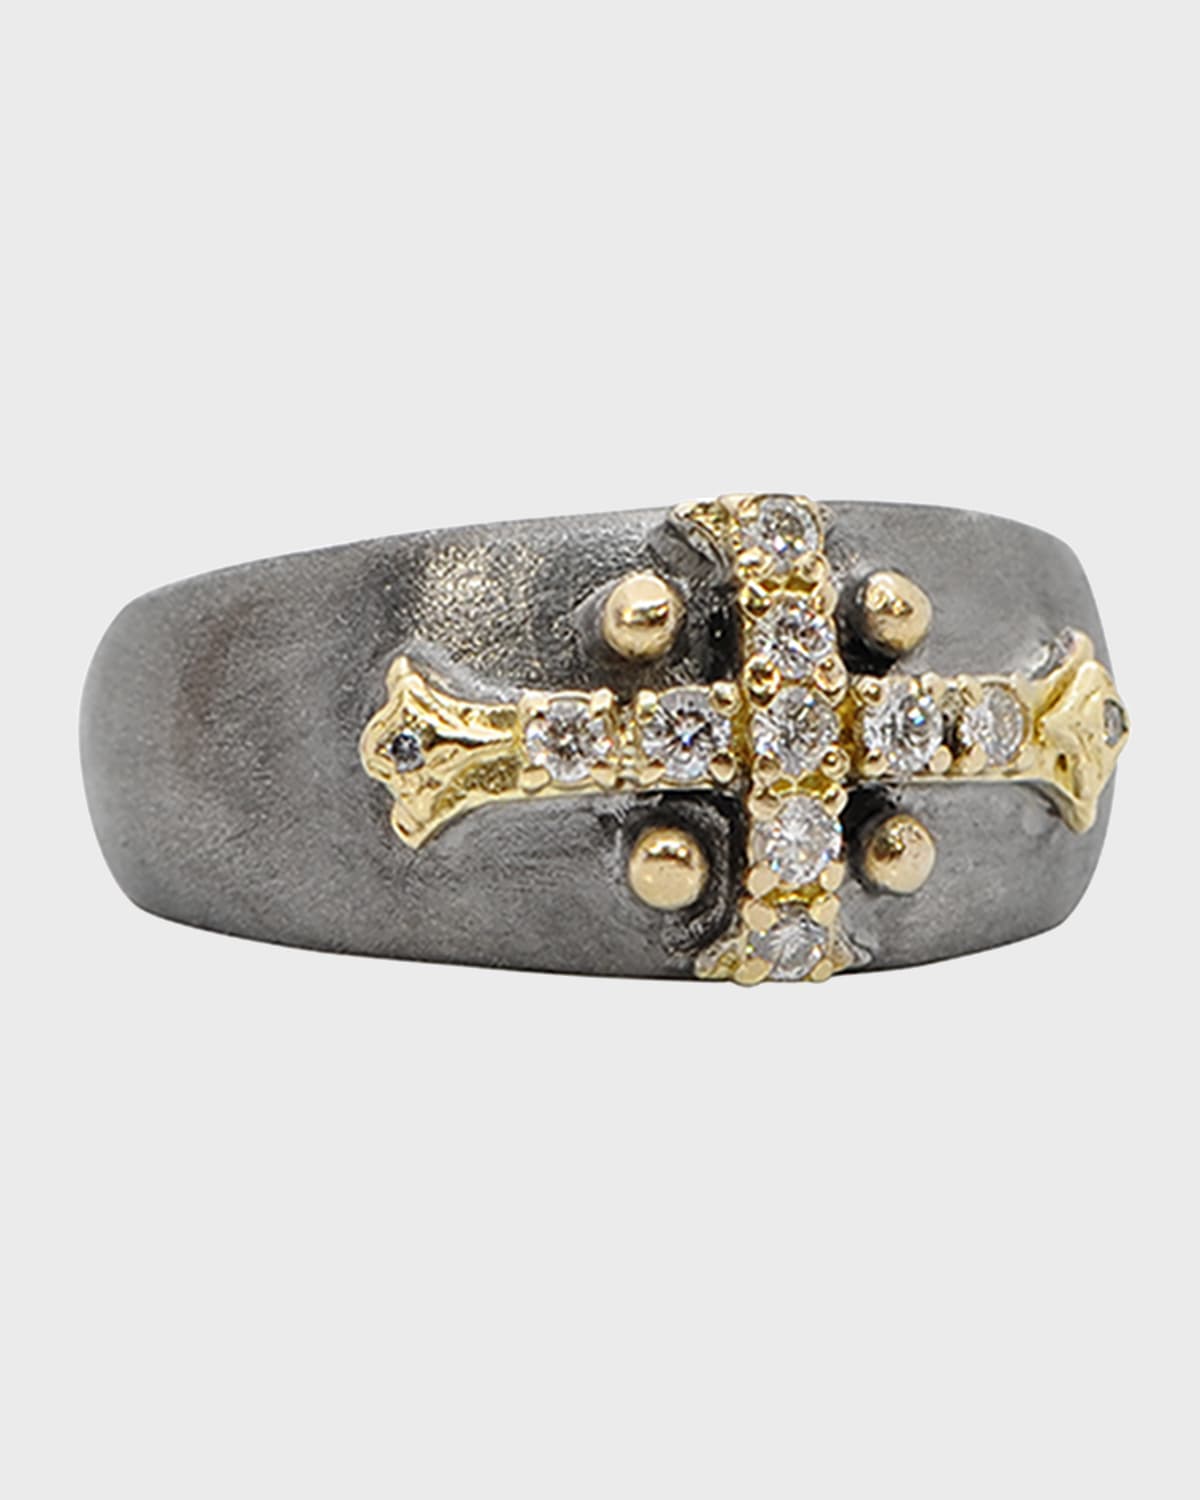 12mm Quartz Doublet Statement Ring with Two-Tone Diamonds